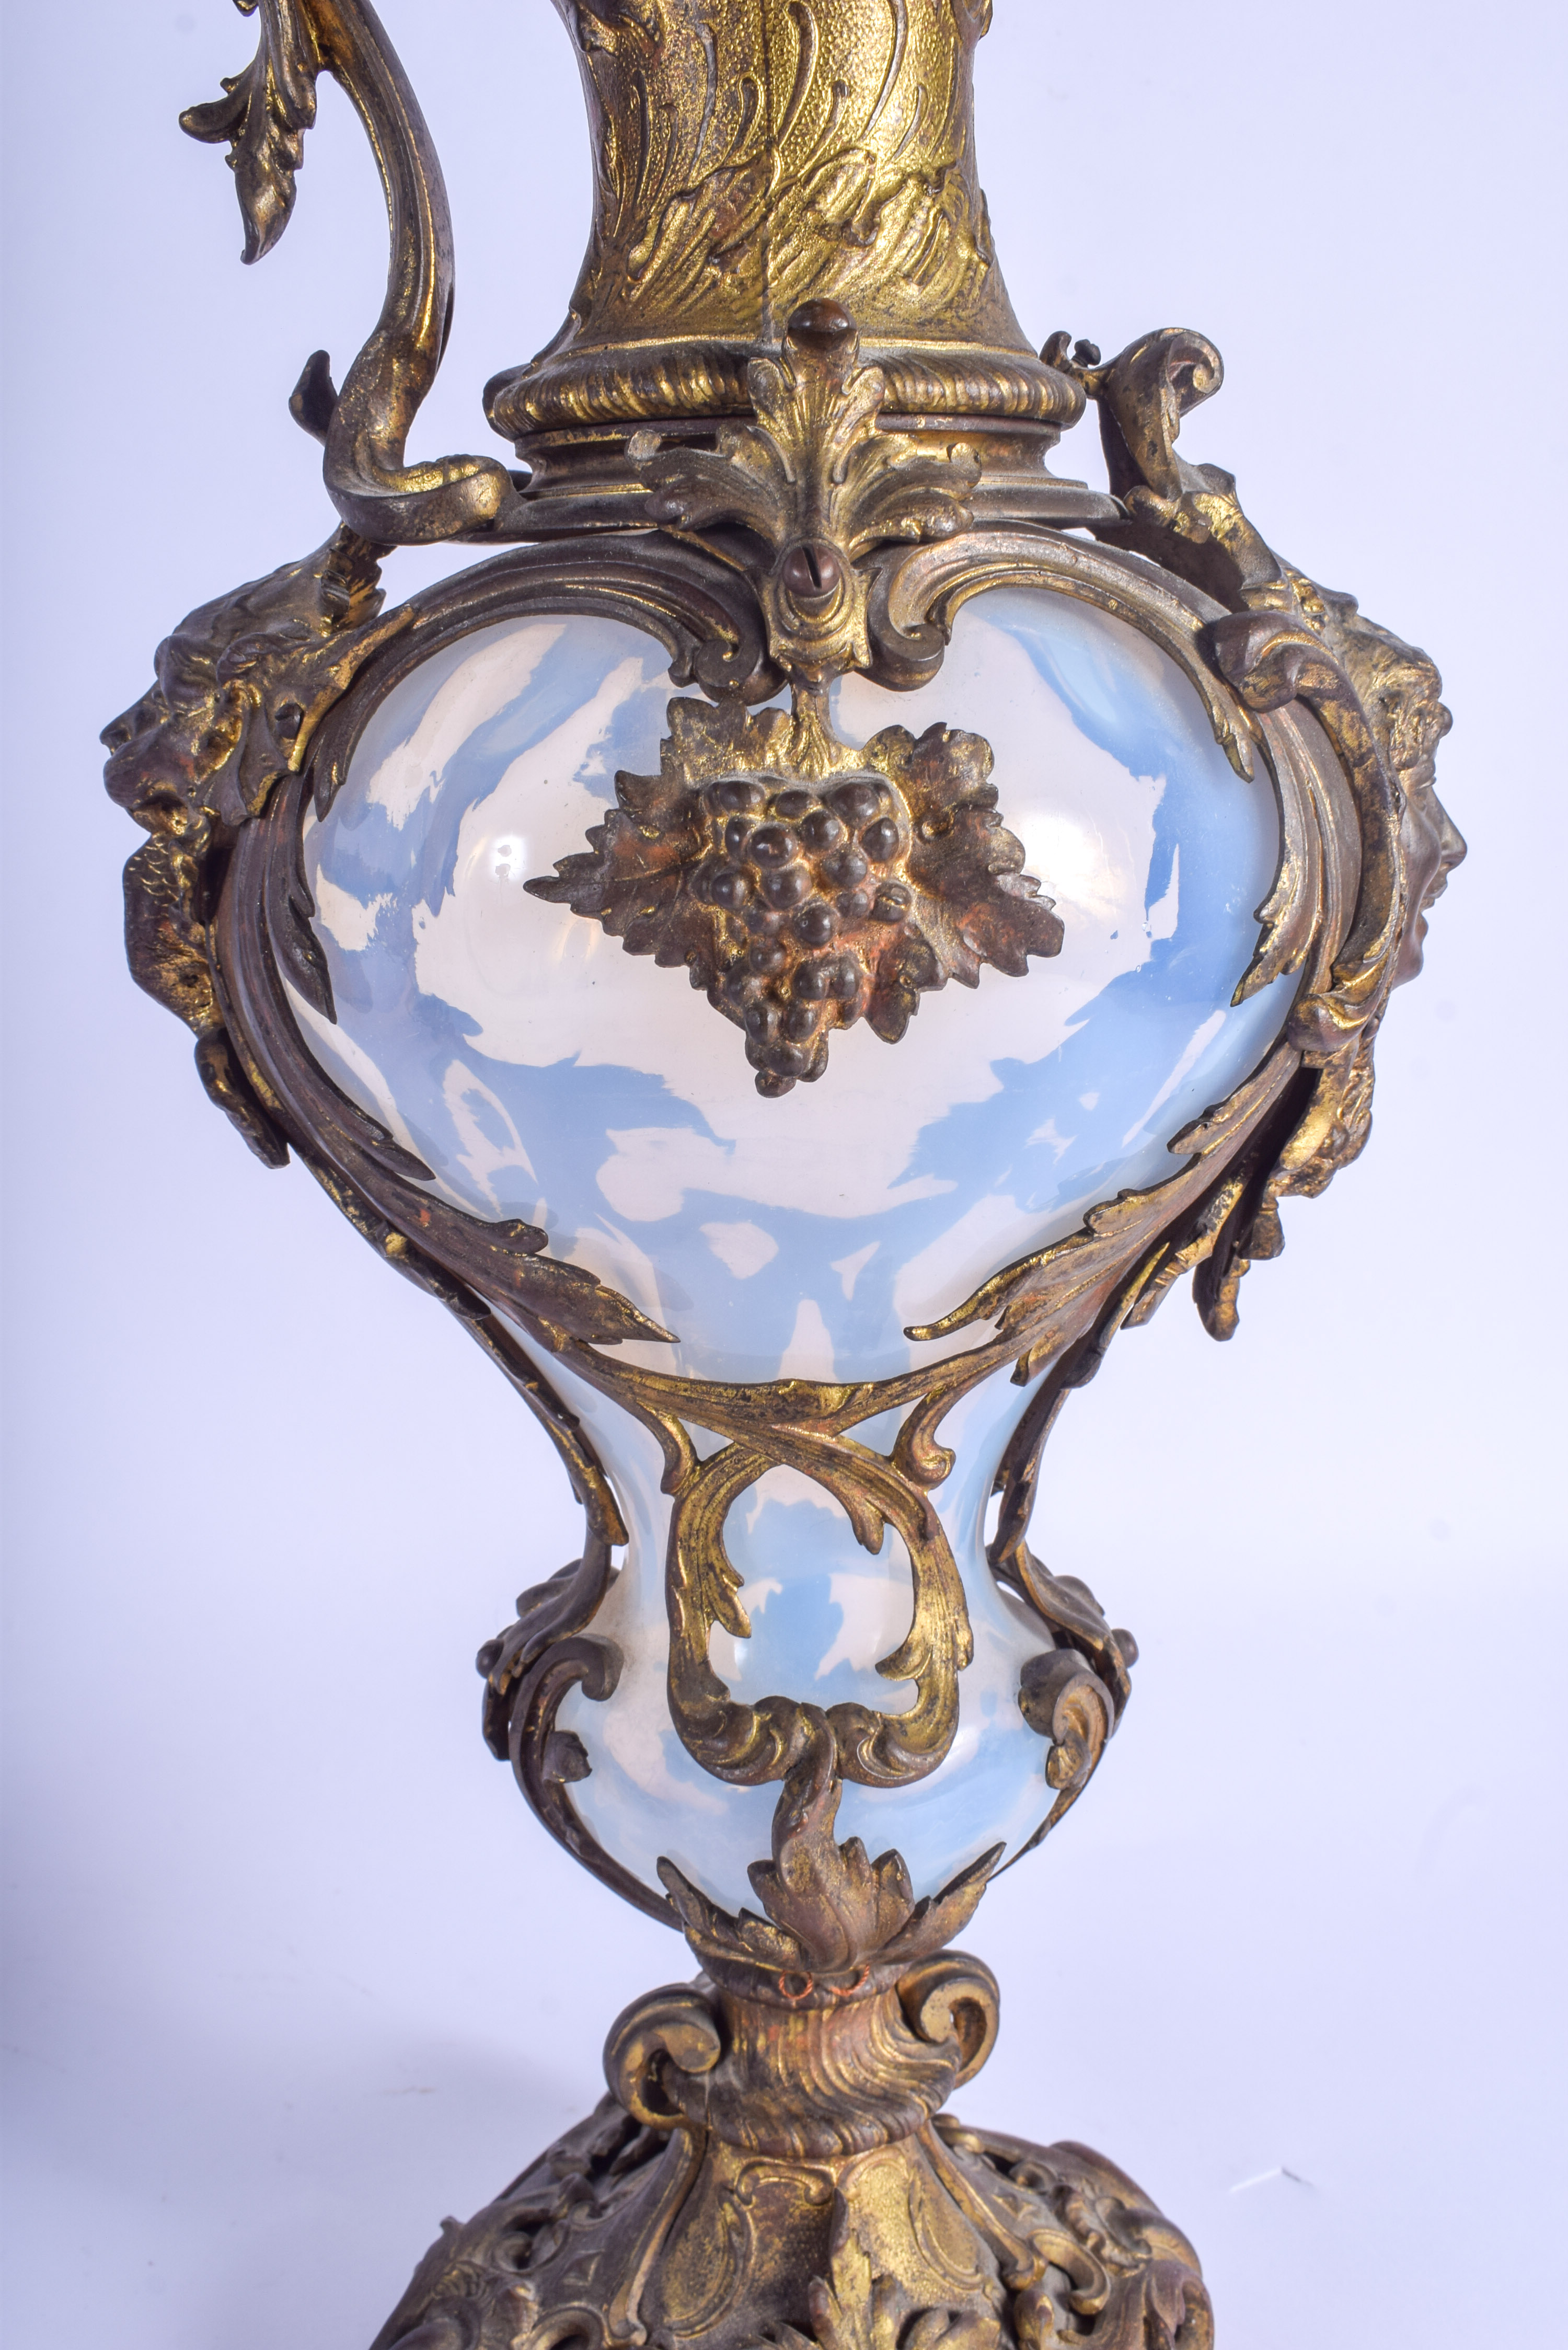 A LARGE PAIR OF 19TH CENTURY VASELINE GLASS EWERS mounted in French bronze. 47 cm x 16 cm. - Image 4 of 4